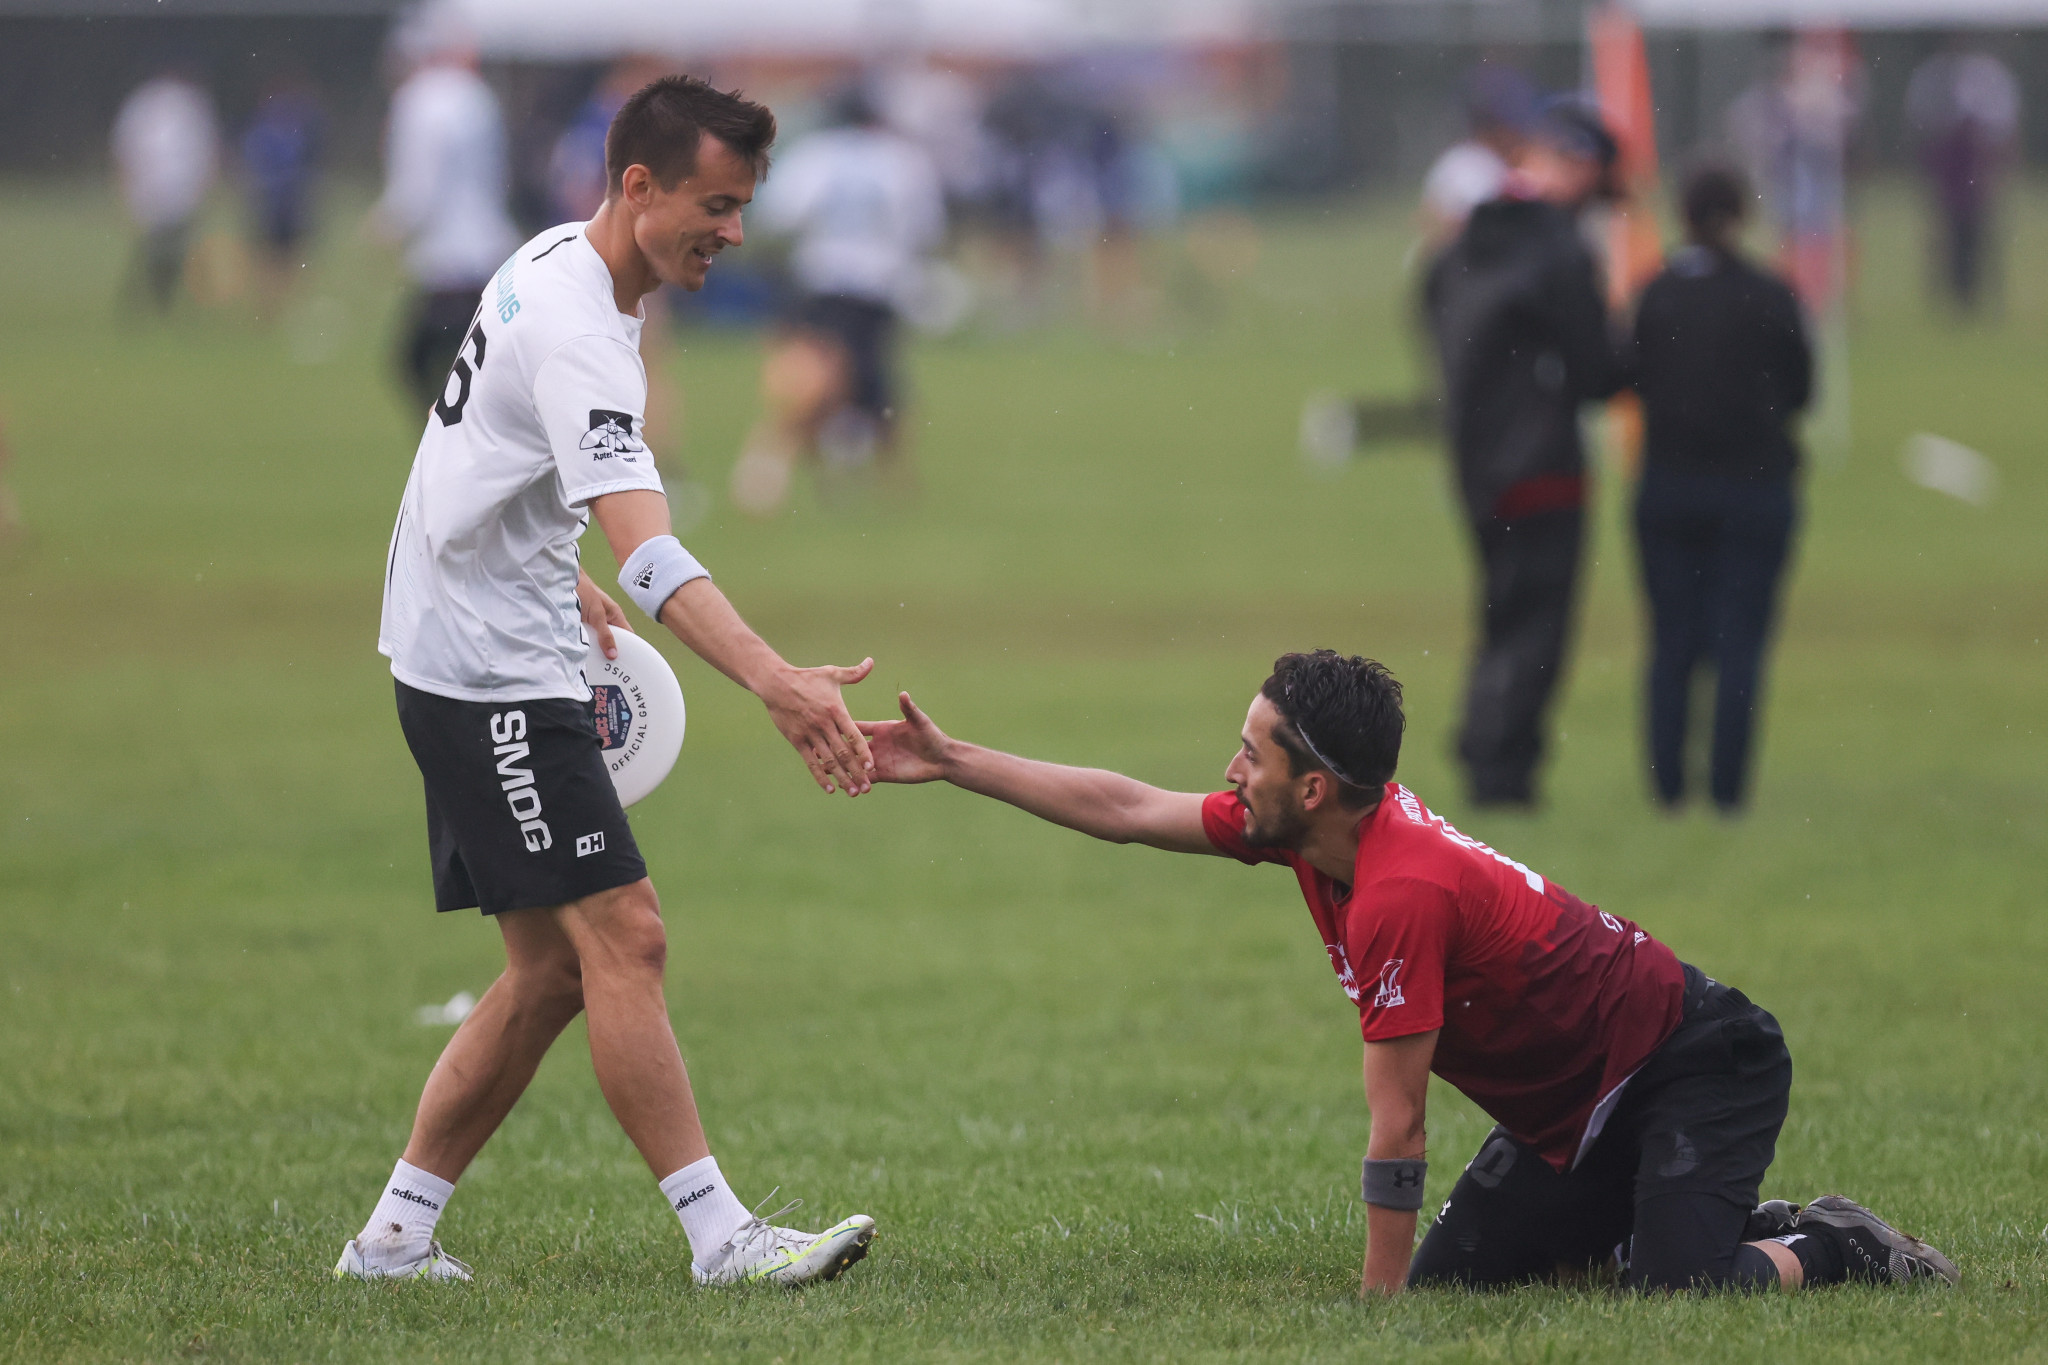 Ultimate athletes are encouraged to treat each other with respect and honesty to ensure the Spirit of the Game is upheld ©Paul Rutherford for UltiPhotos